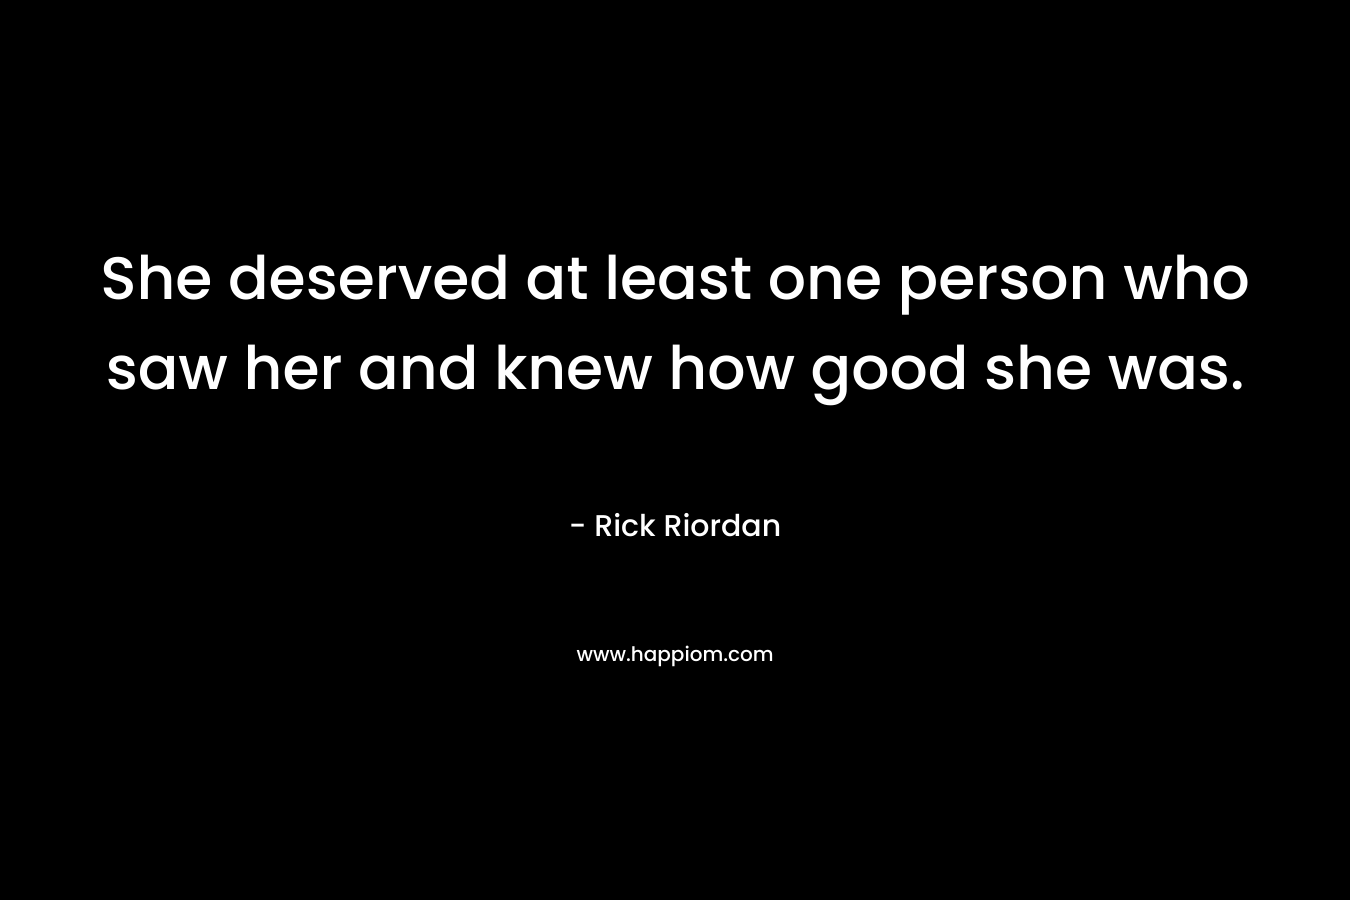 She deserved at least one person who saw her and knew how good she was.